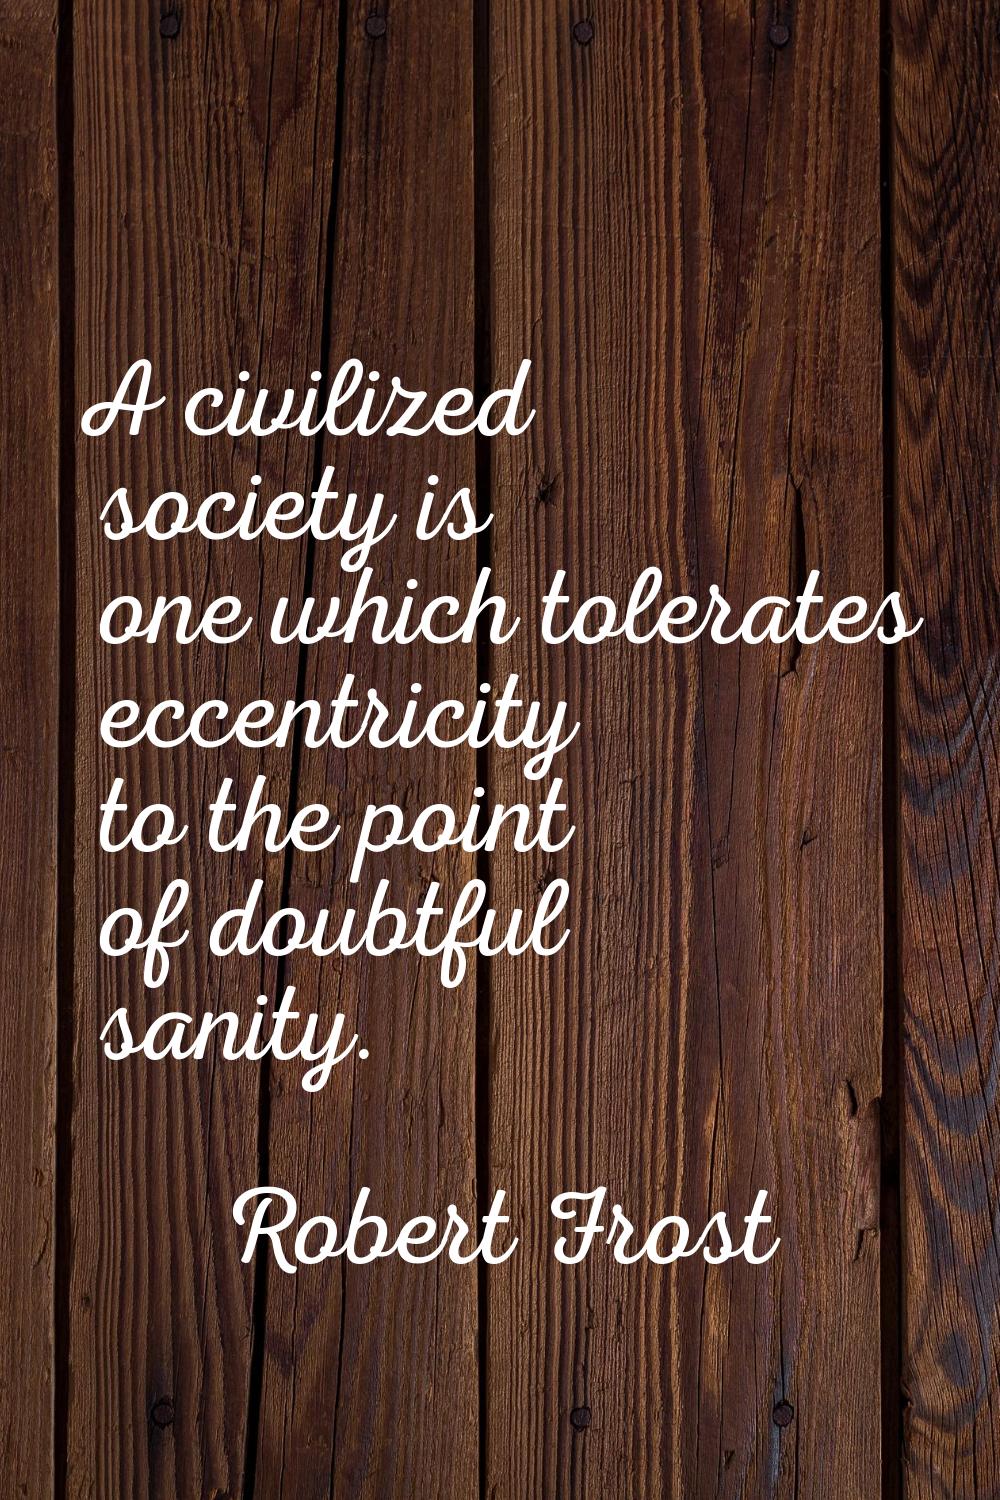 A civilized society is one which tolerates eccentricity to the point of doubtful sanity.